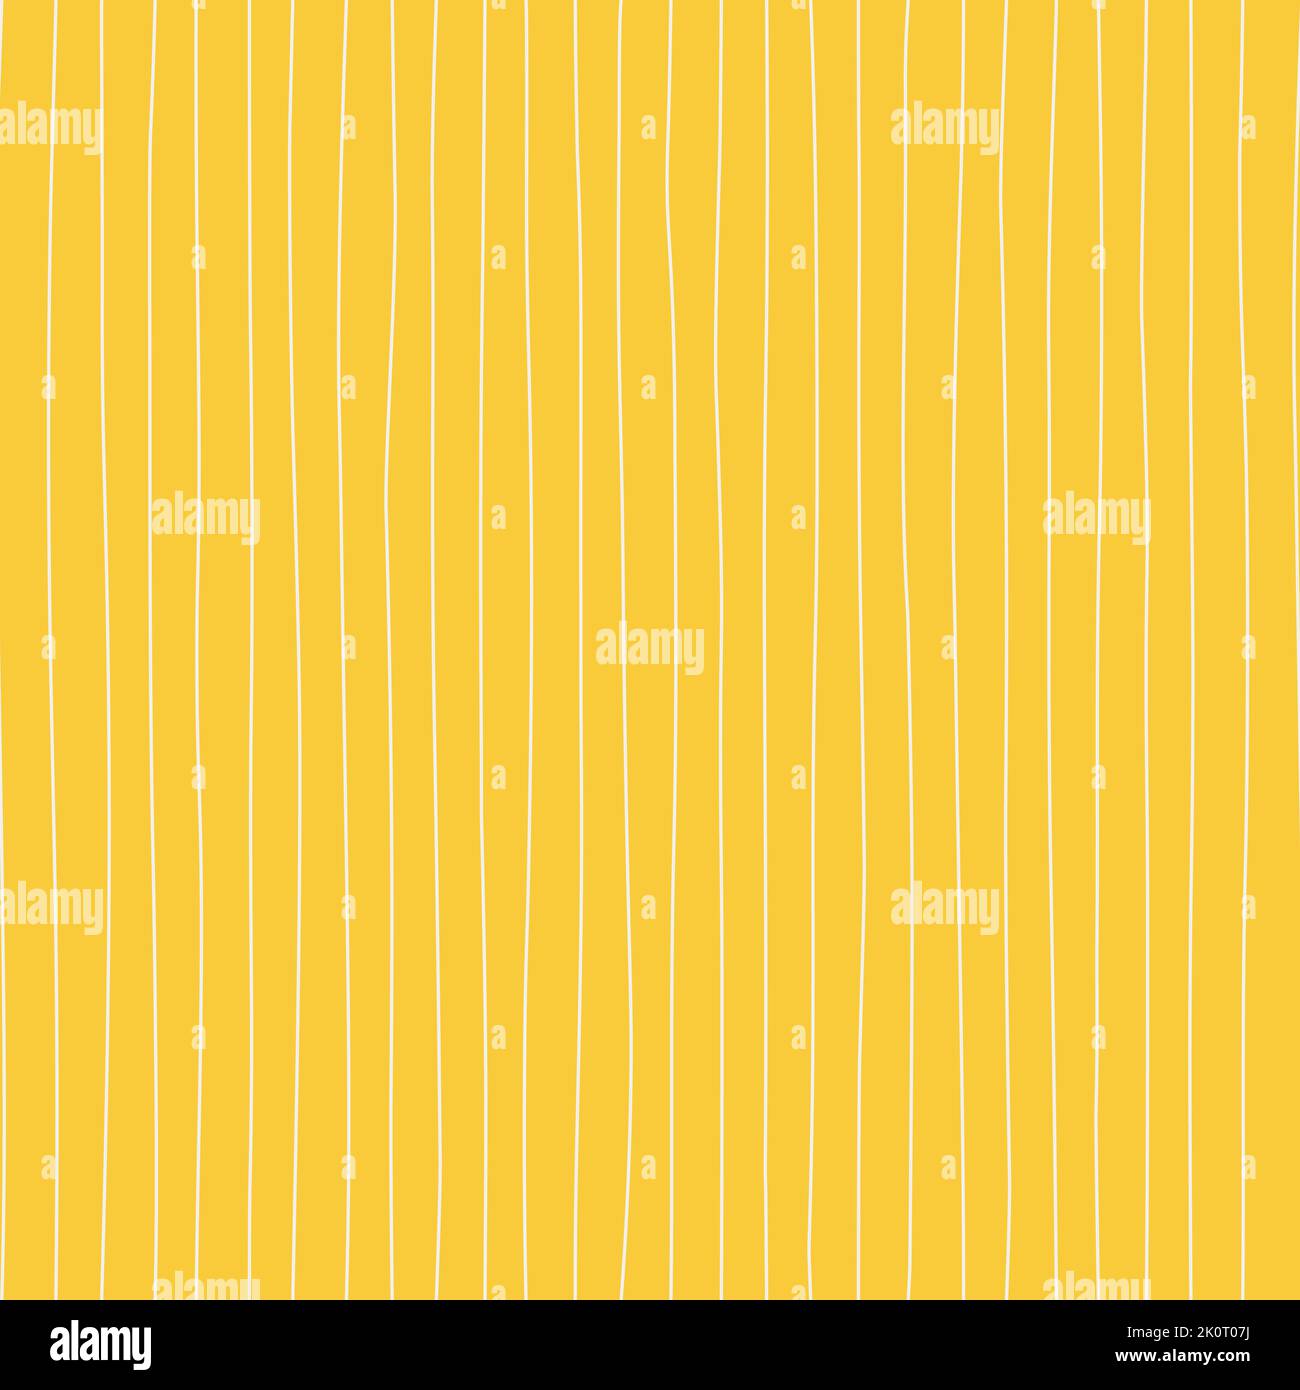 Vector seamless abstract geometric pattern. White thin uneven stripes on a yellow background. Ideal for design, wallpaper, packaging, textiles Stock Vector